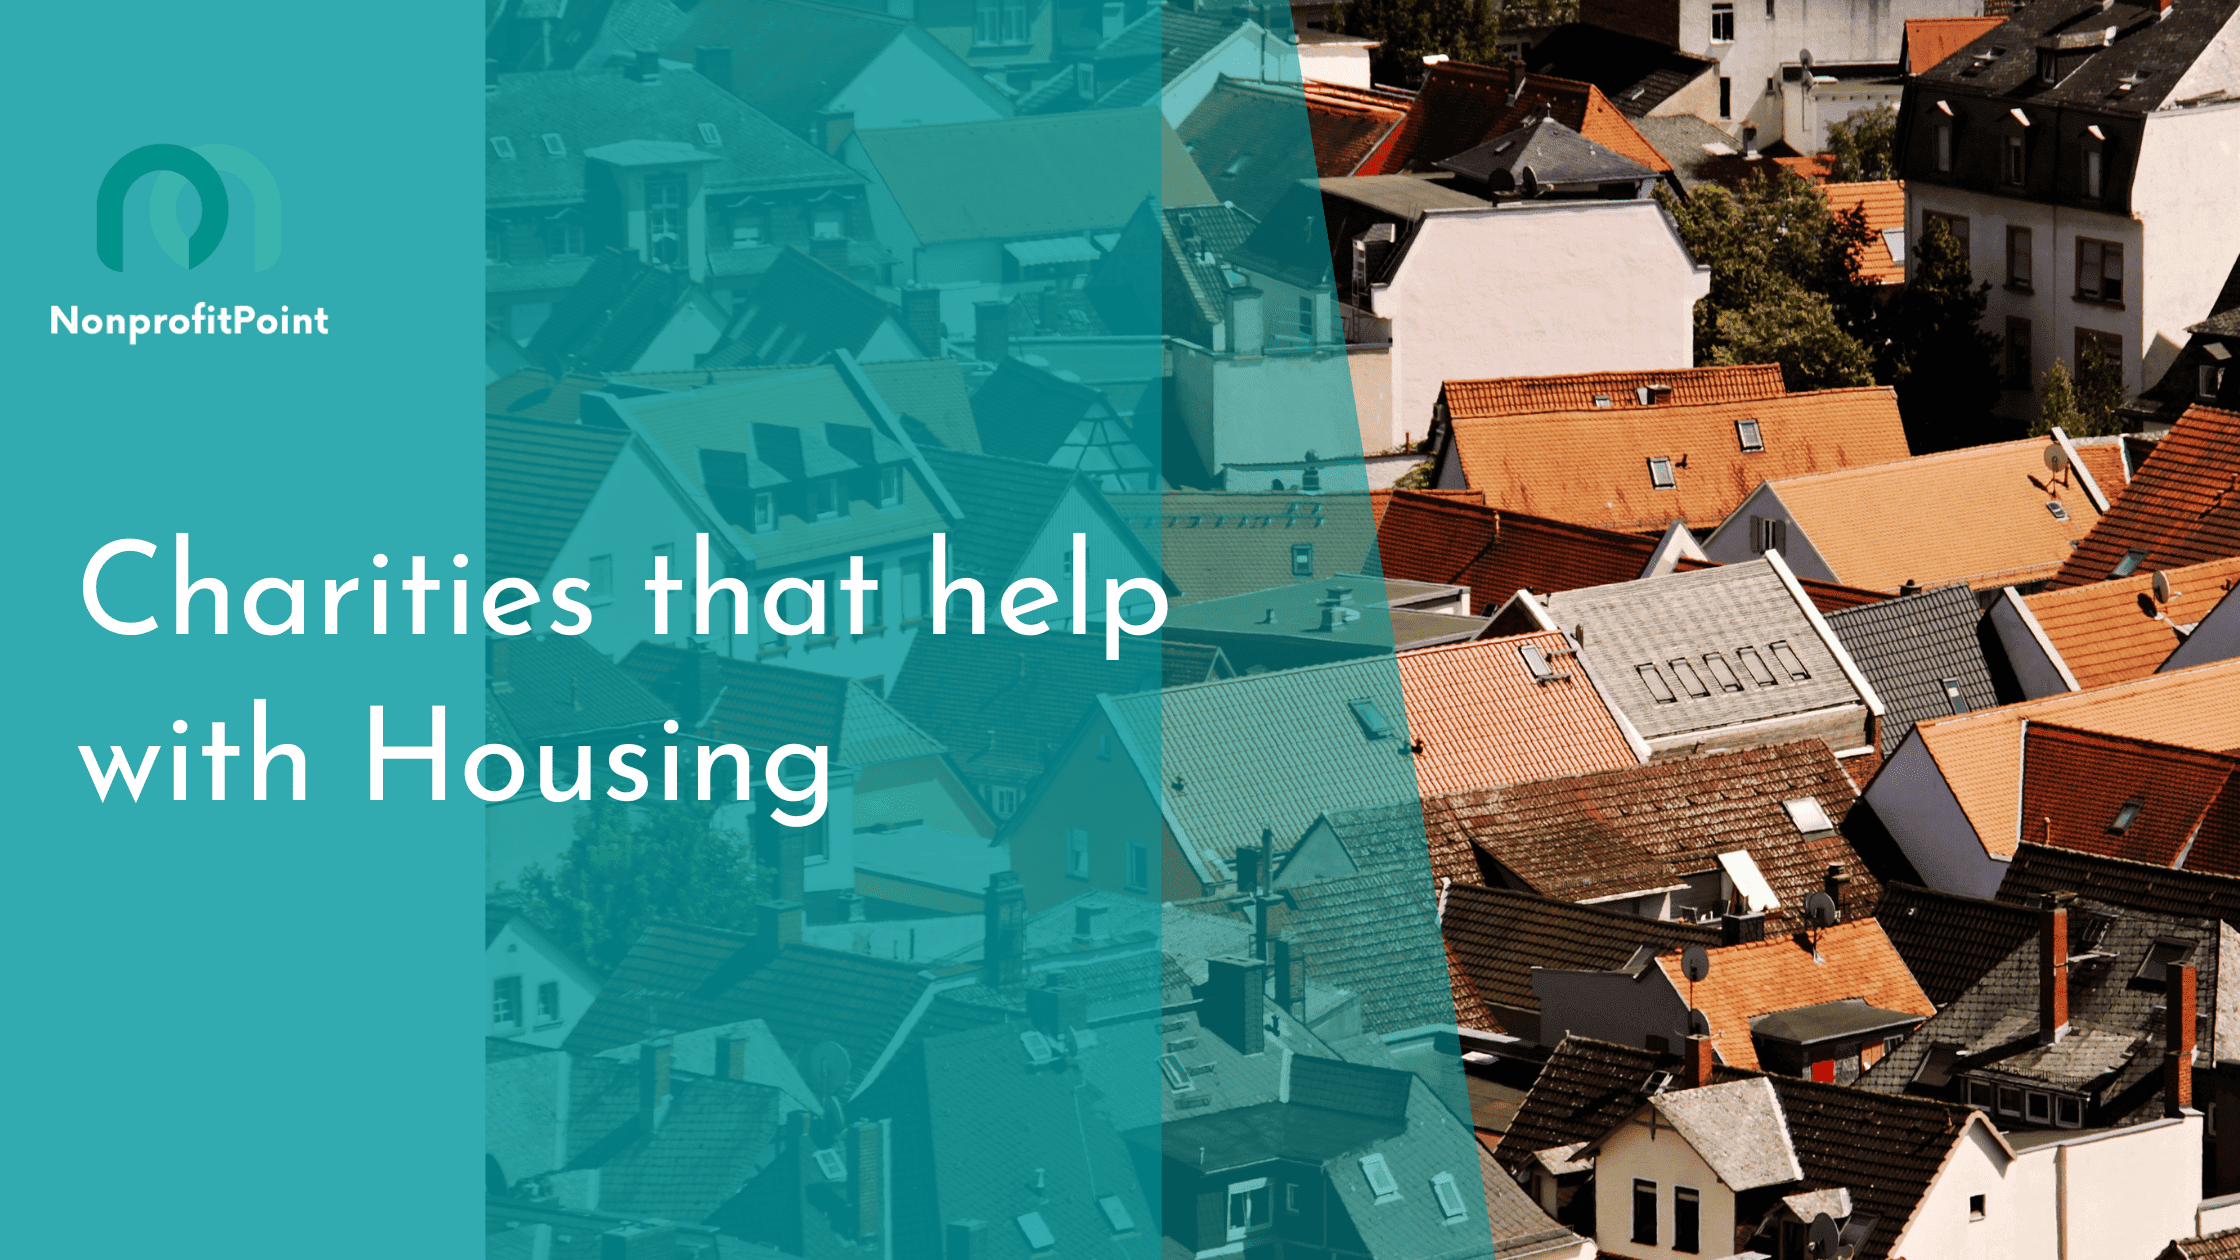 Charities that help with Housing